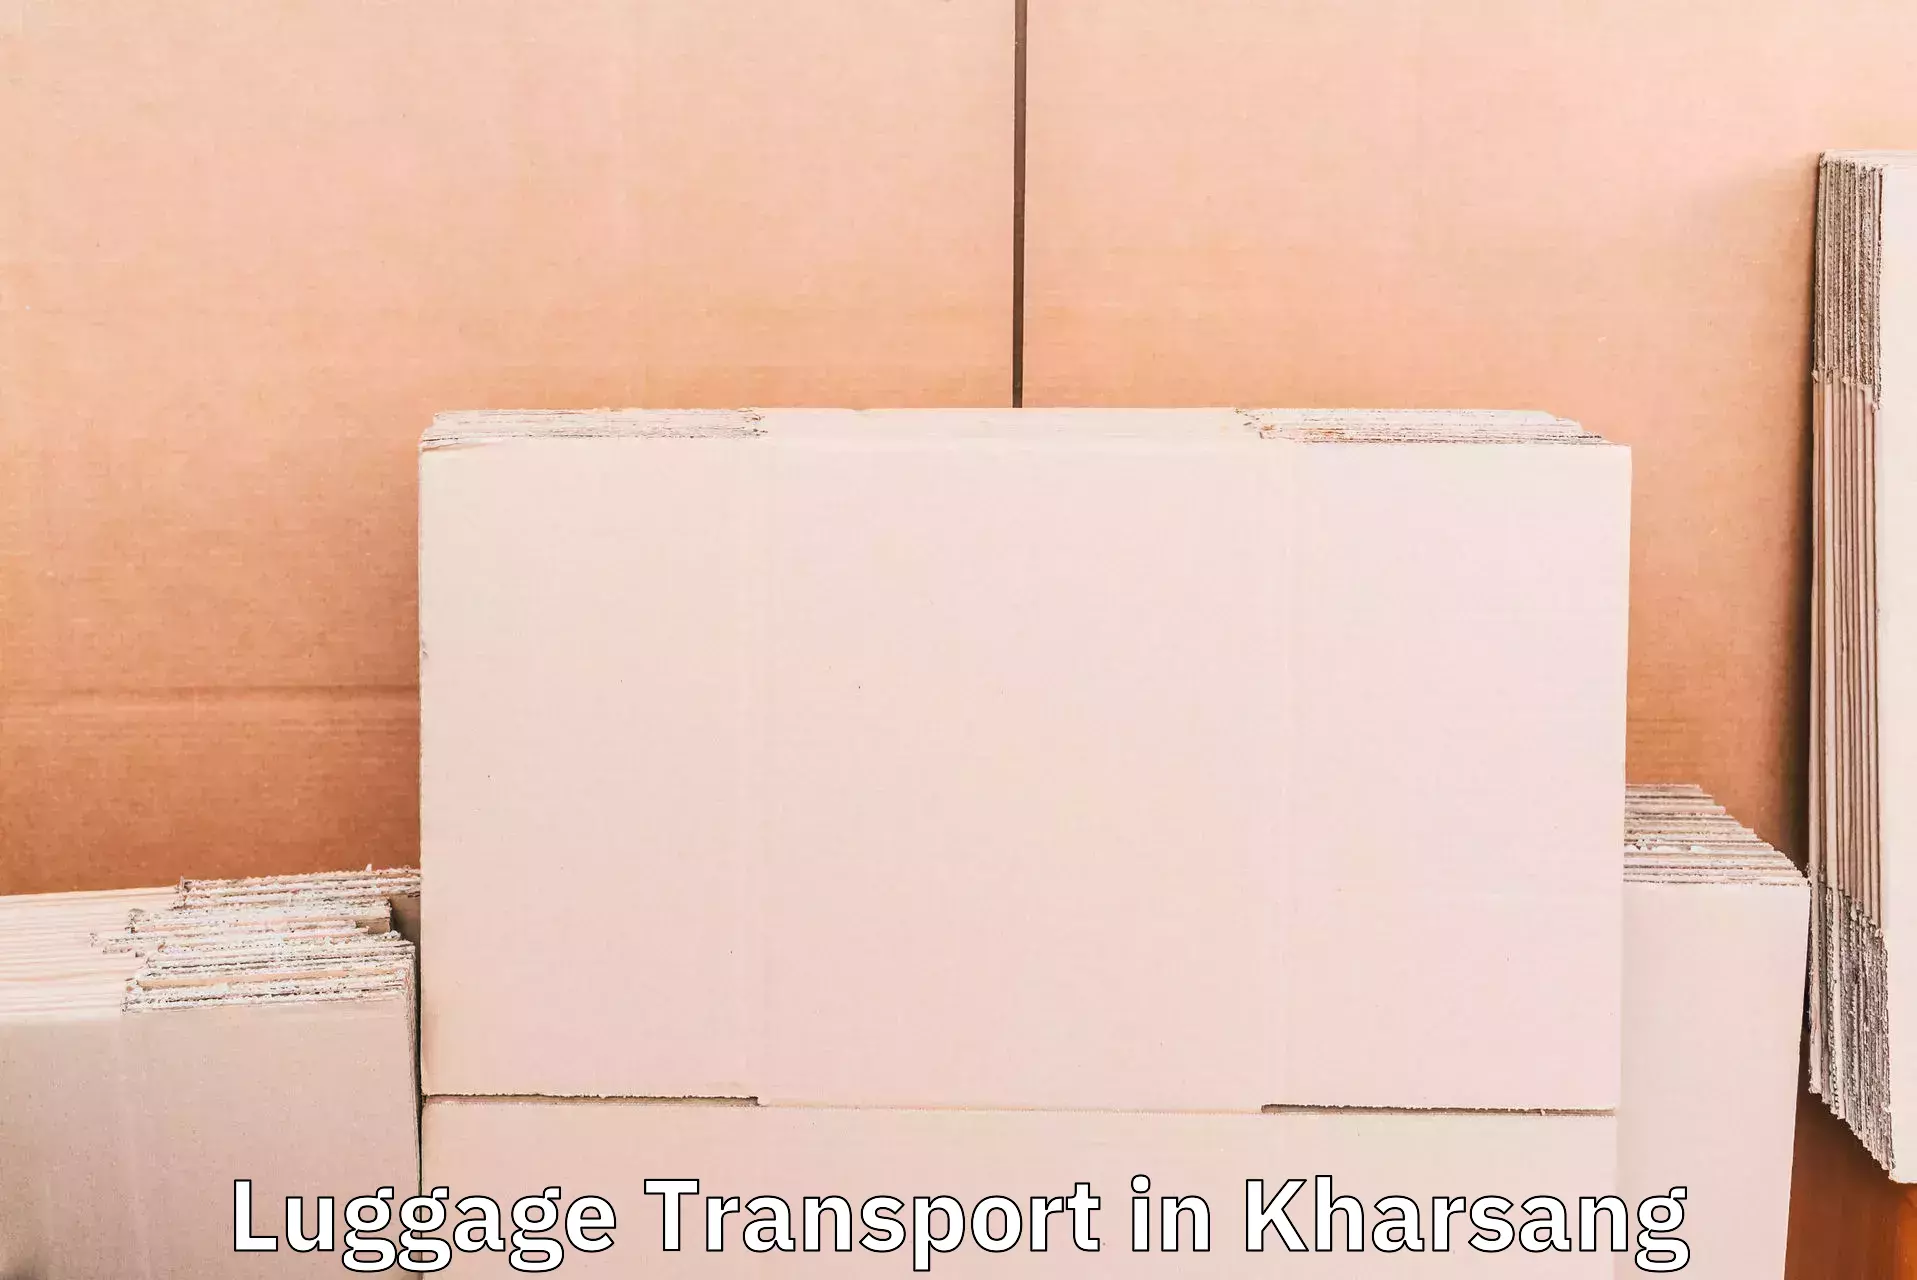 Luggage transport consultancy in Kharsang